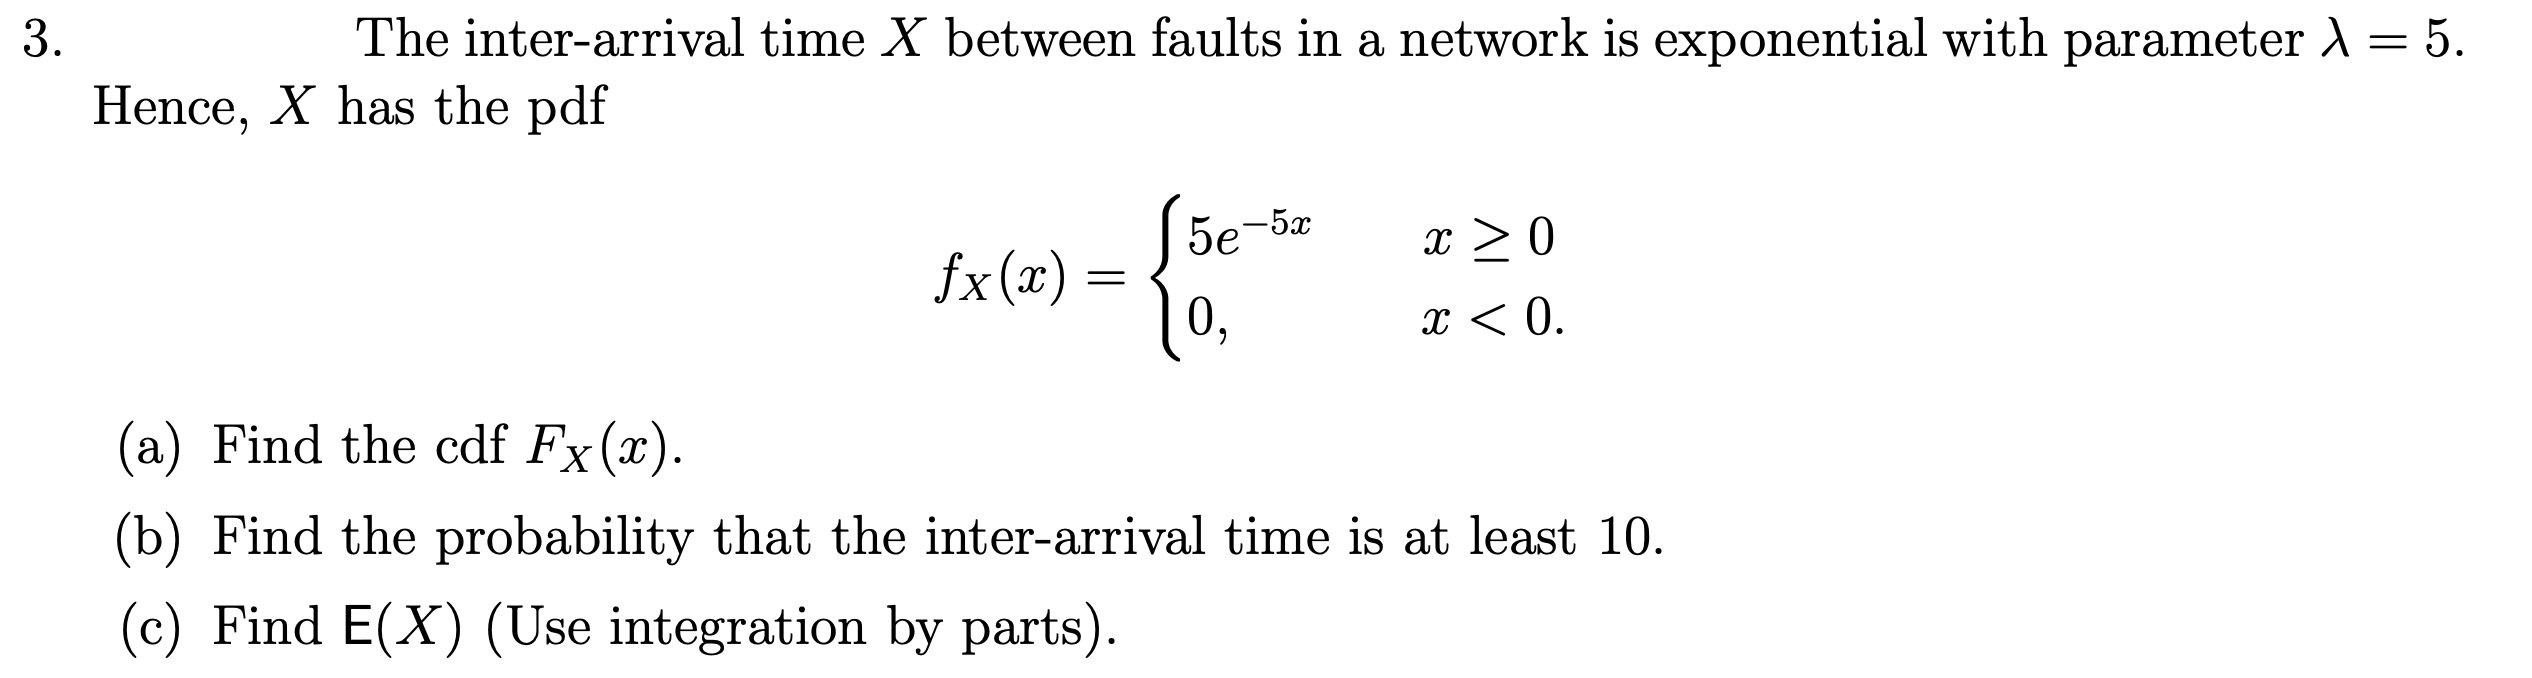 The inter-arrival time X between faults in a network is exponential with parameter = 5.
Hence, X has the pdf
5e-5x
x > 0
fx(x) =
10,
x < 0.
(a) Find the cdf Fx(x).
X
(b) Find the probability that the inter-arrival time is at least 10.
(c) Find E(X) (Use integration by parts).
